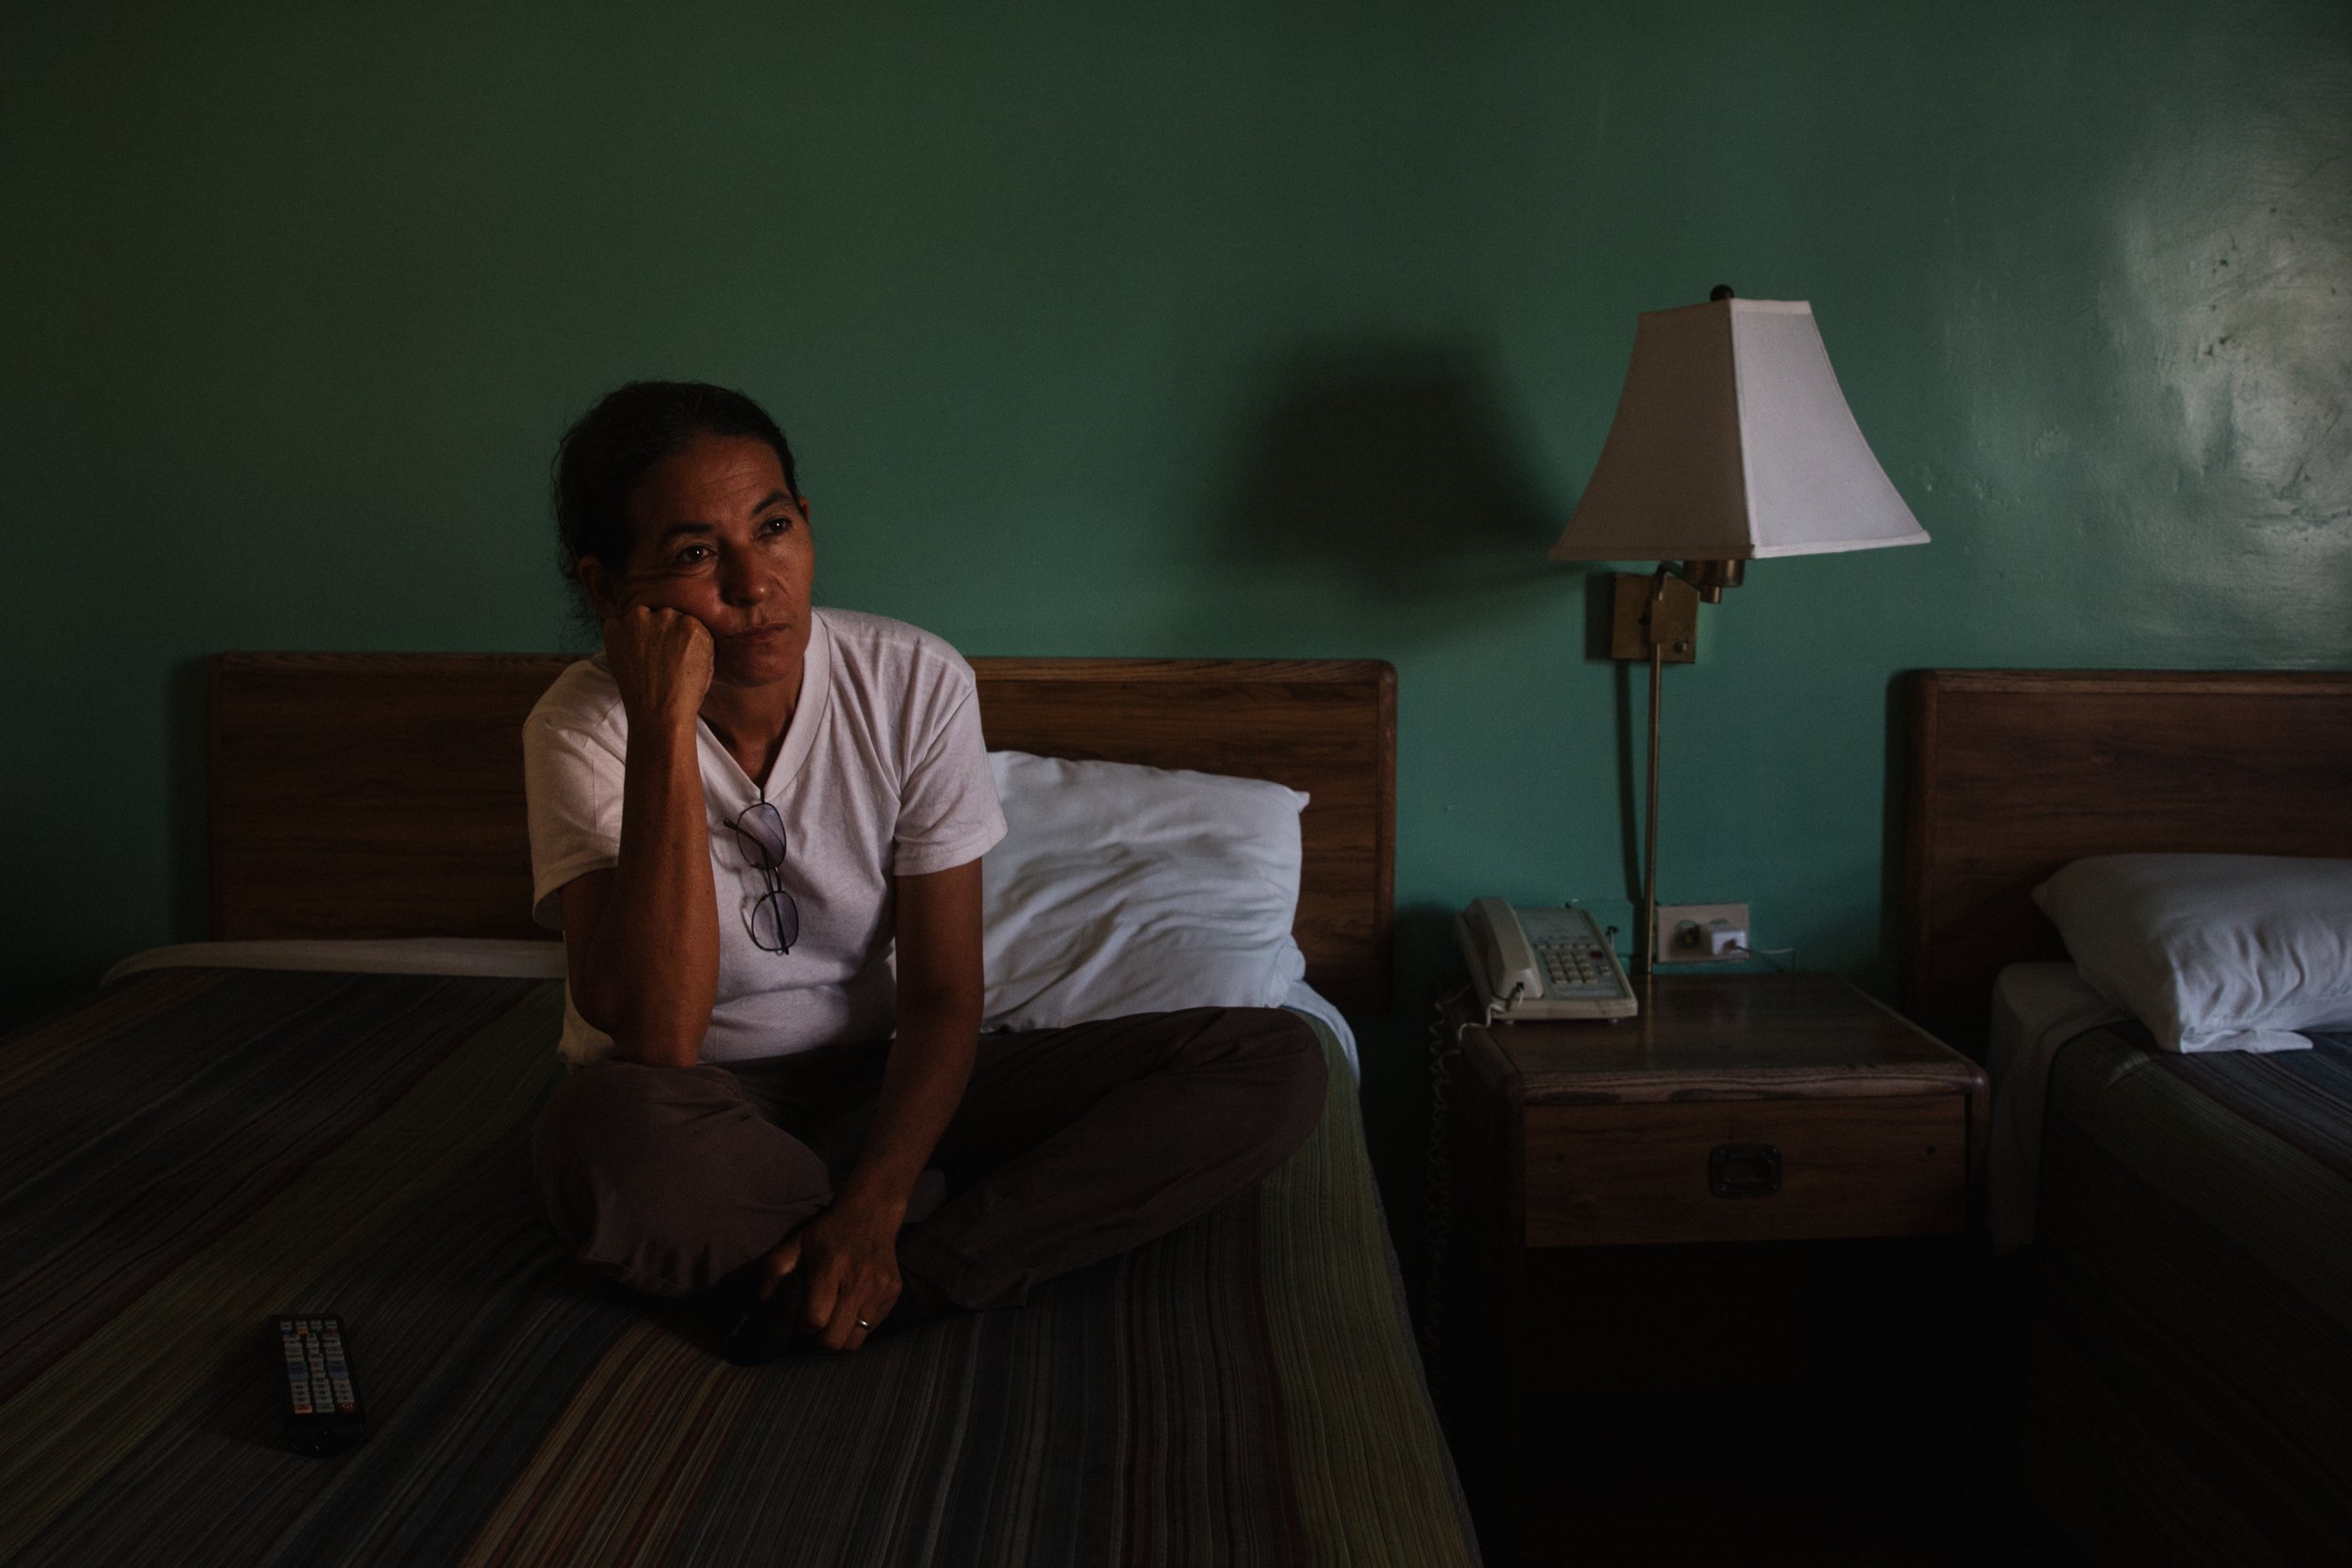  Waiting for Answers: Liliam Morales patiently awaits to provide samples for her DNA test in her hotel room in Nogales, Sonora, Mexico on November 21, 2016, hoping to uncover vital information about her identity and reconnect with missing daughter. 